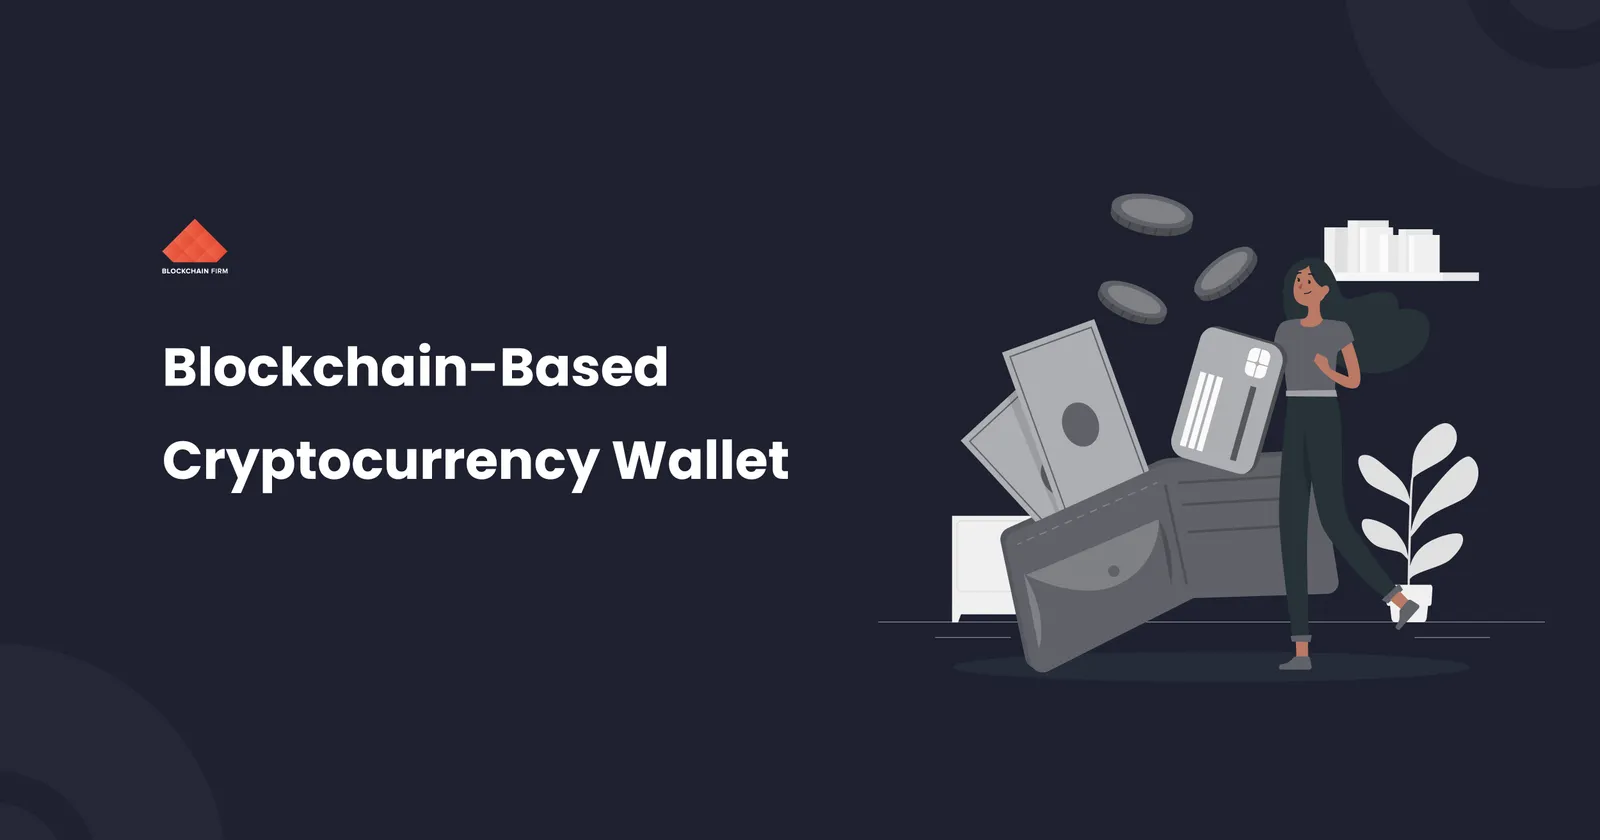 Why Should You Need a Multi-Cryptocurrency Wallet? Top 4 Reasons